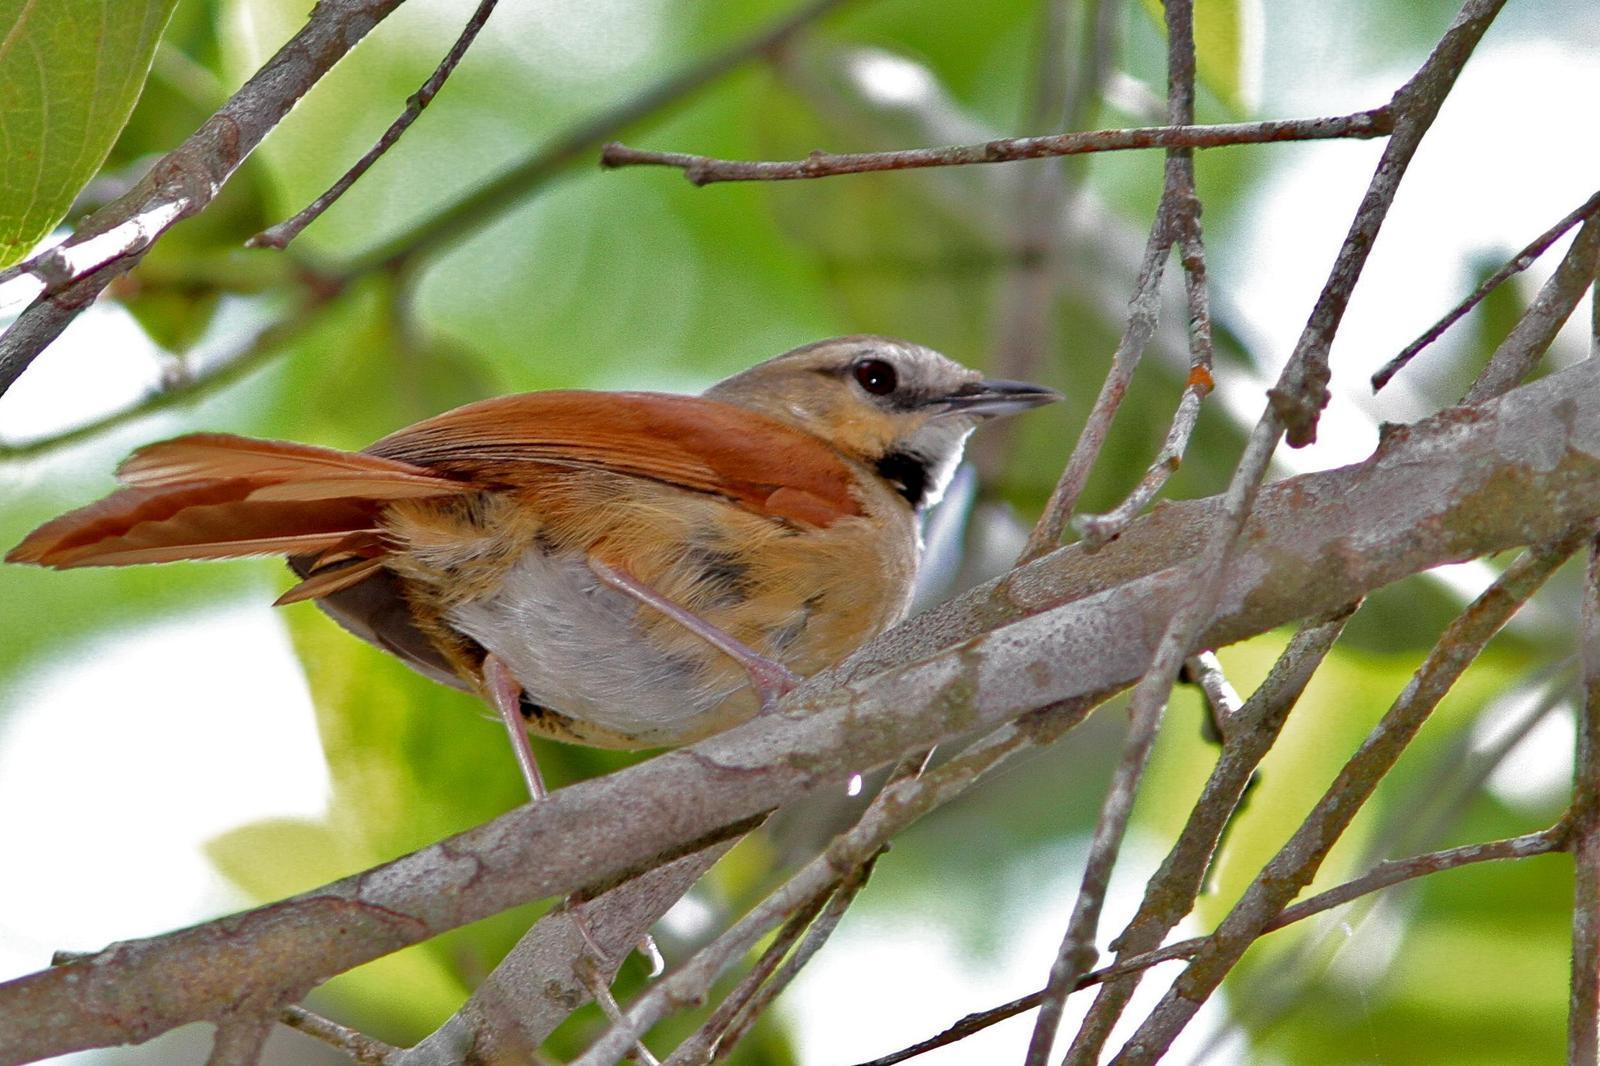 Ochre-cheeked Spinetail Photo by Marcelo Padua